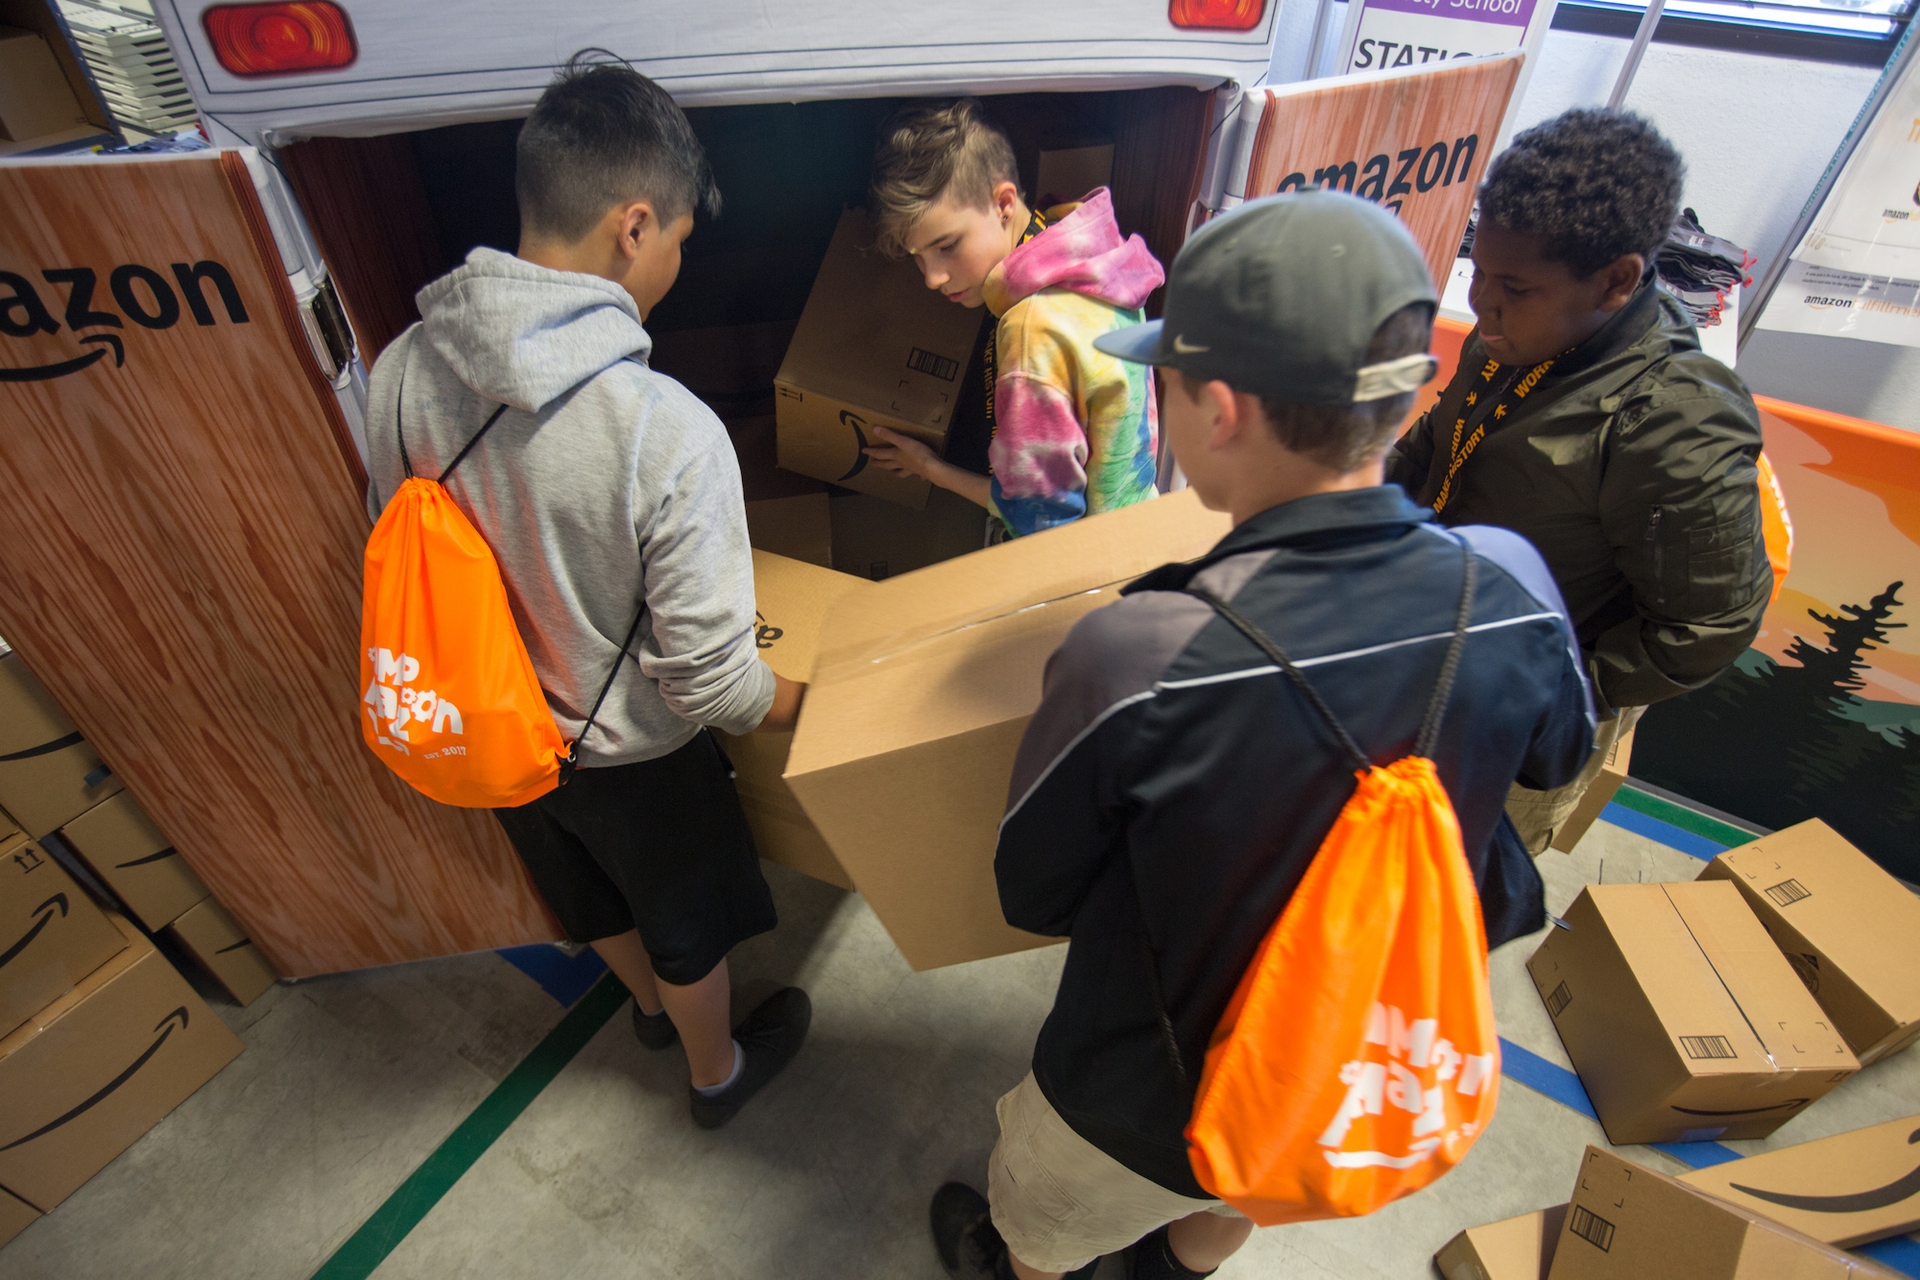 Students participate in a Camp Amazon event at a fulfillment center in Washington